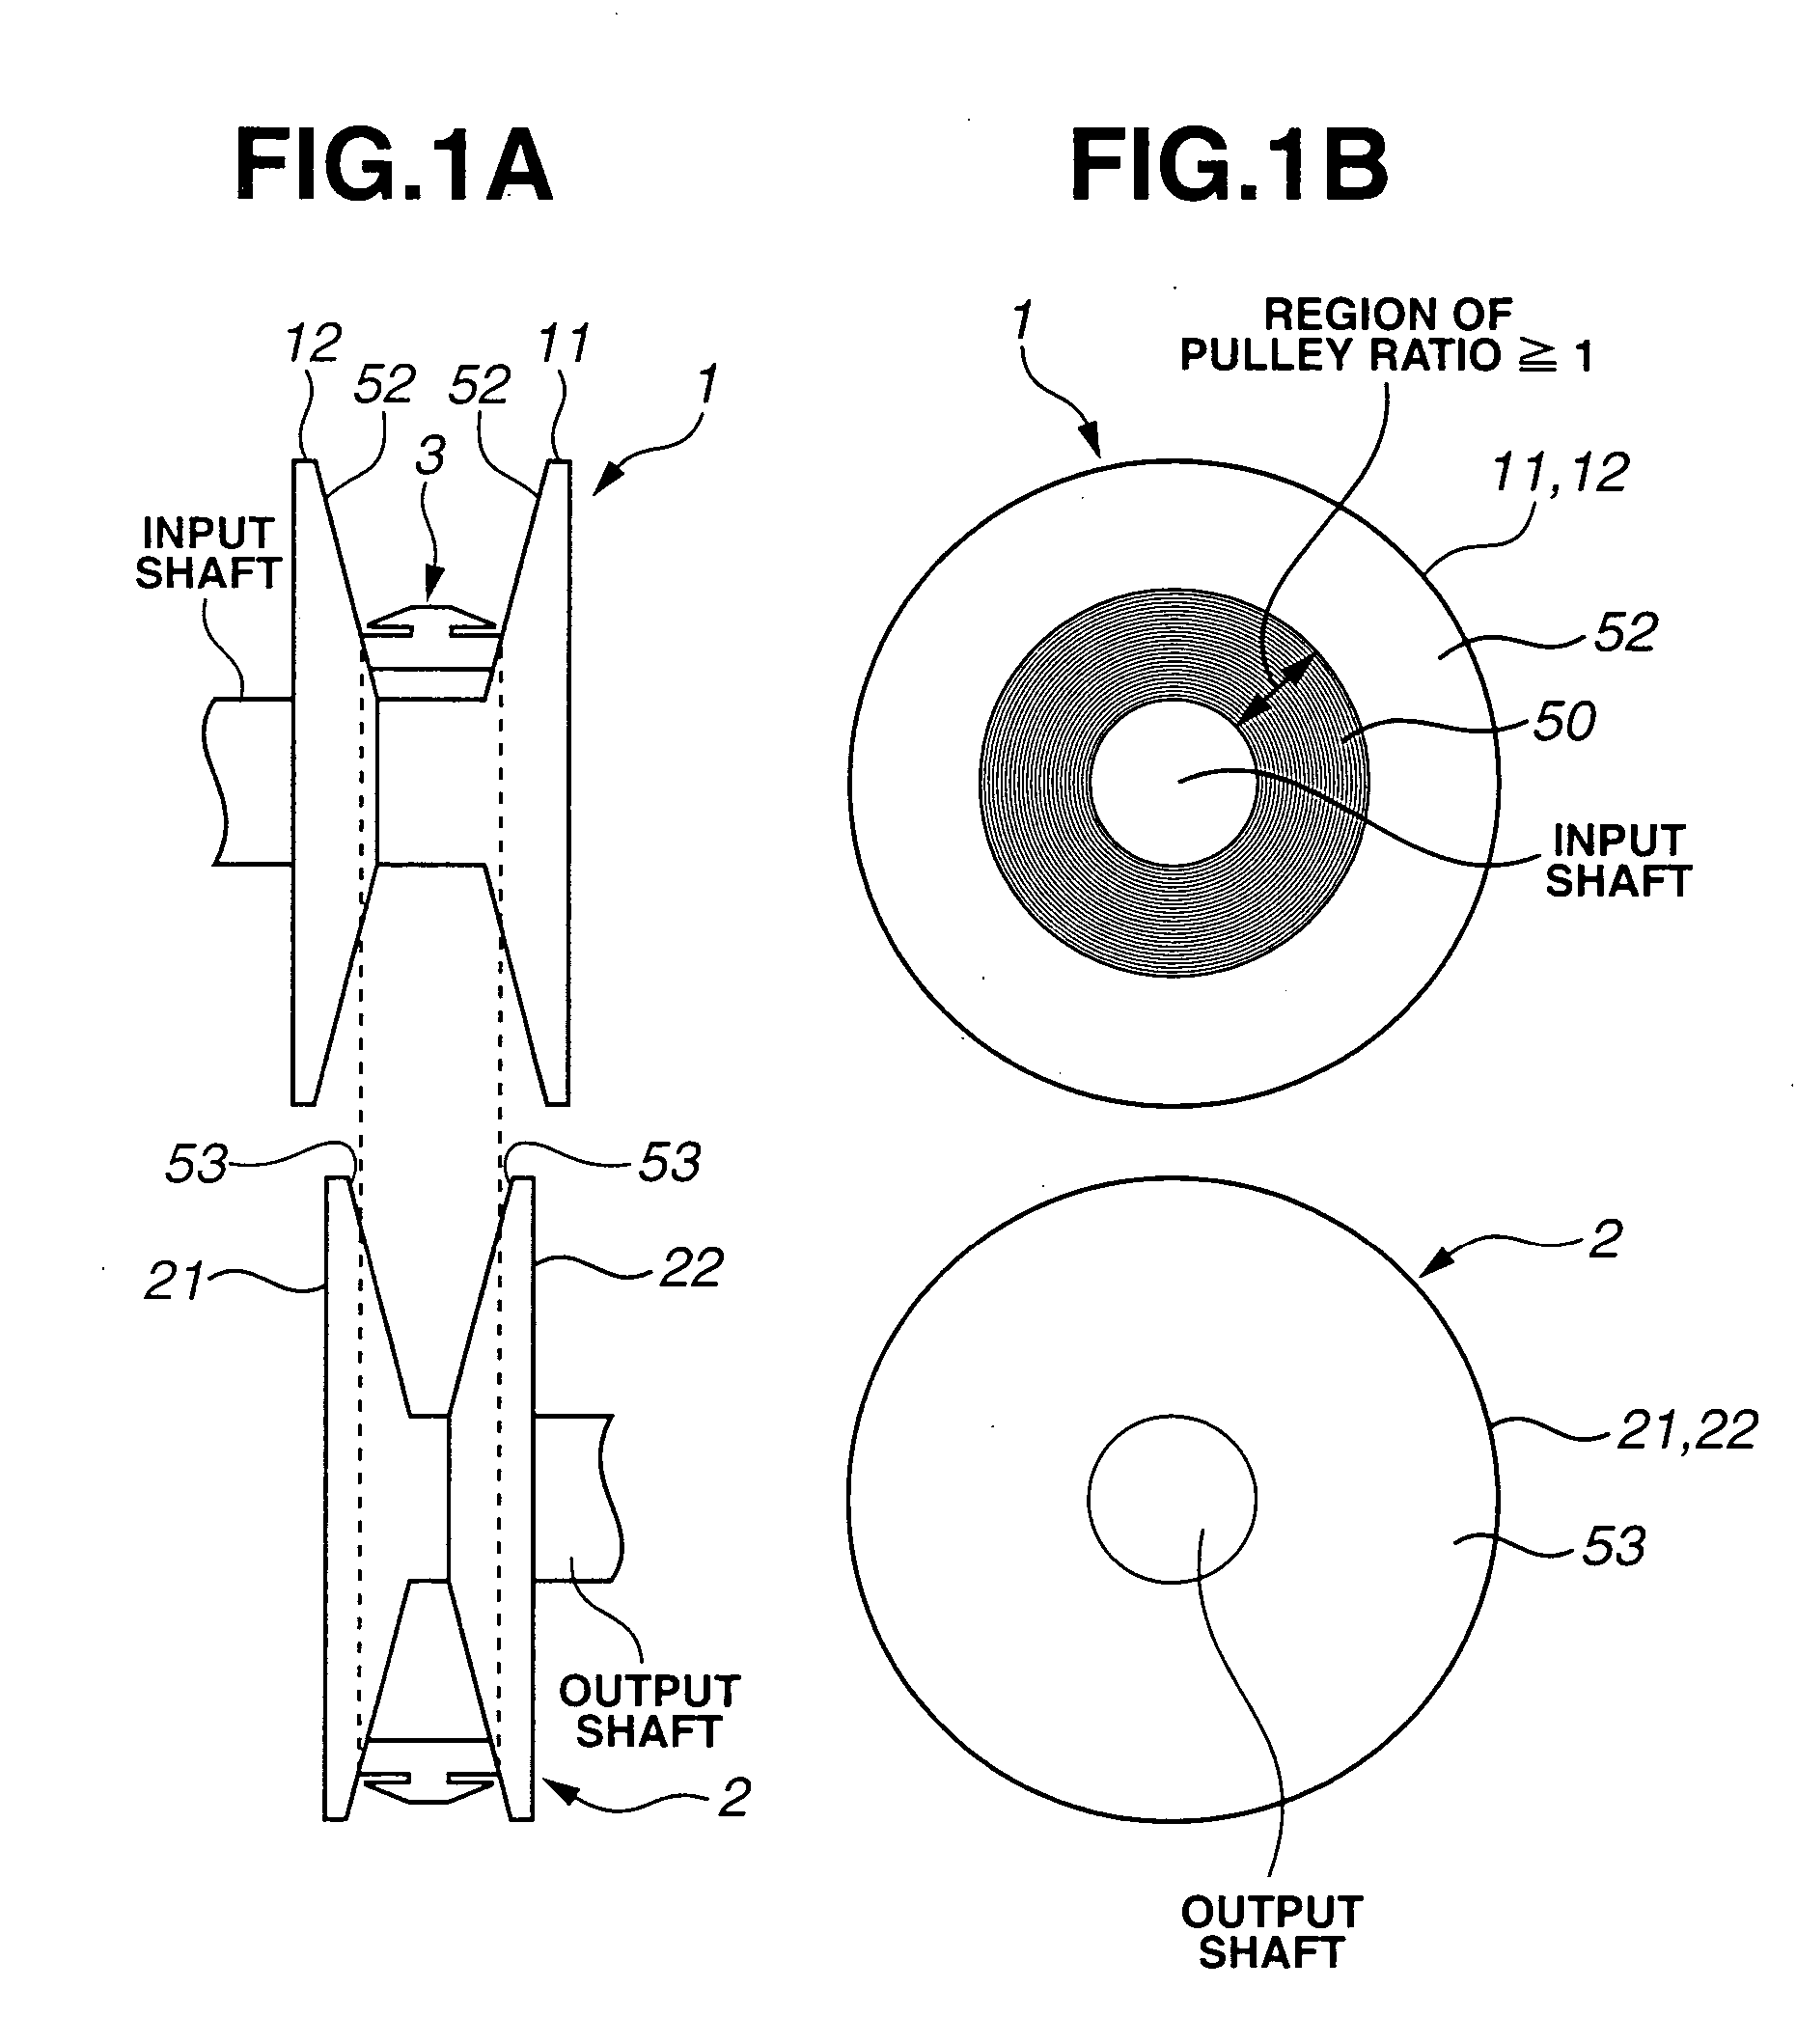 Process for producing a pulley for a continuously variable belt drive transmission